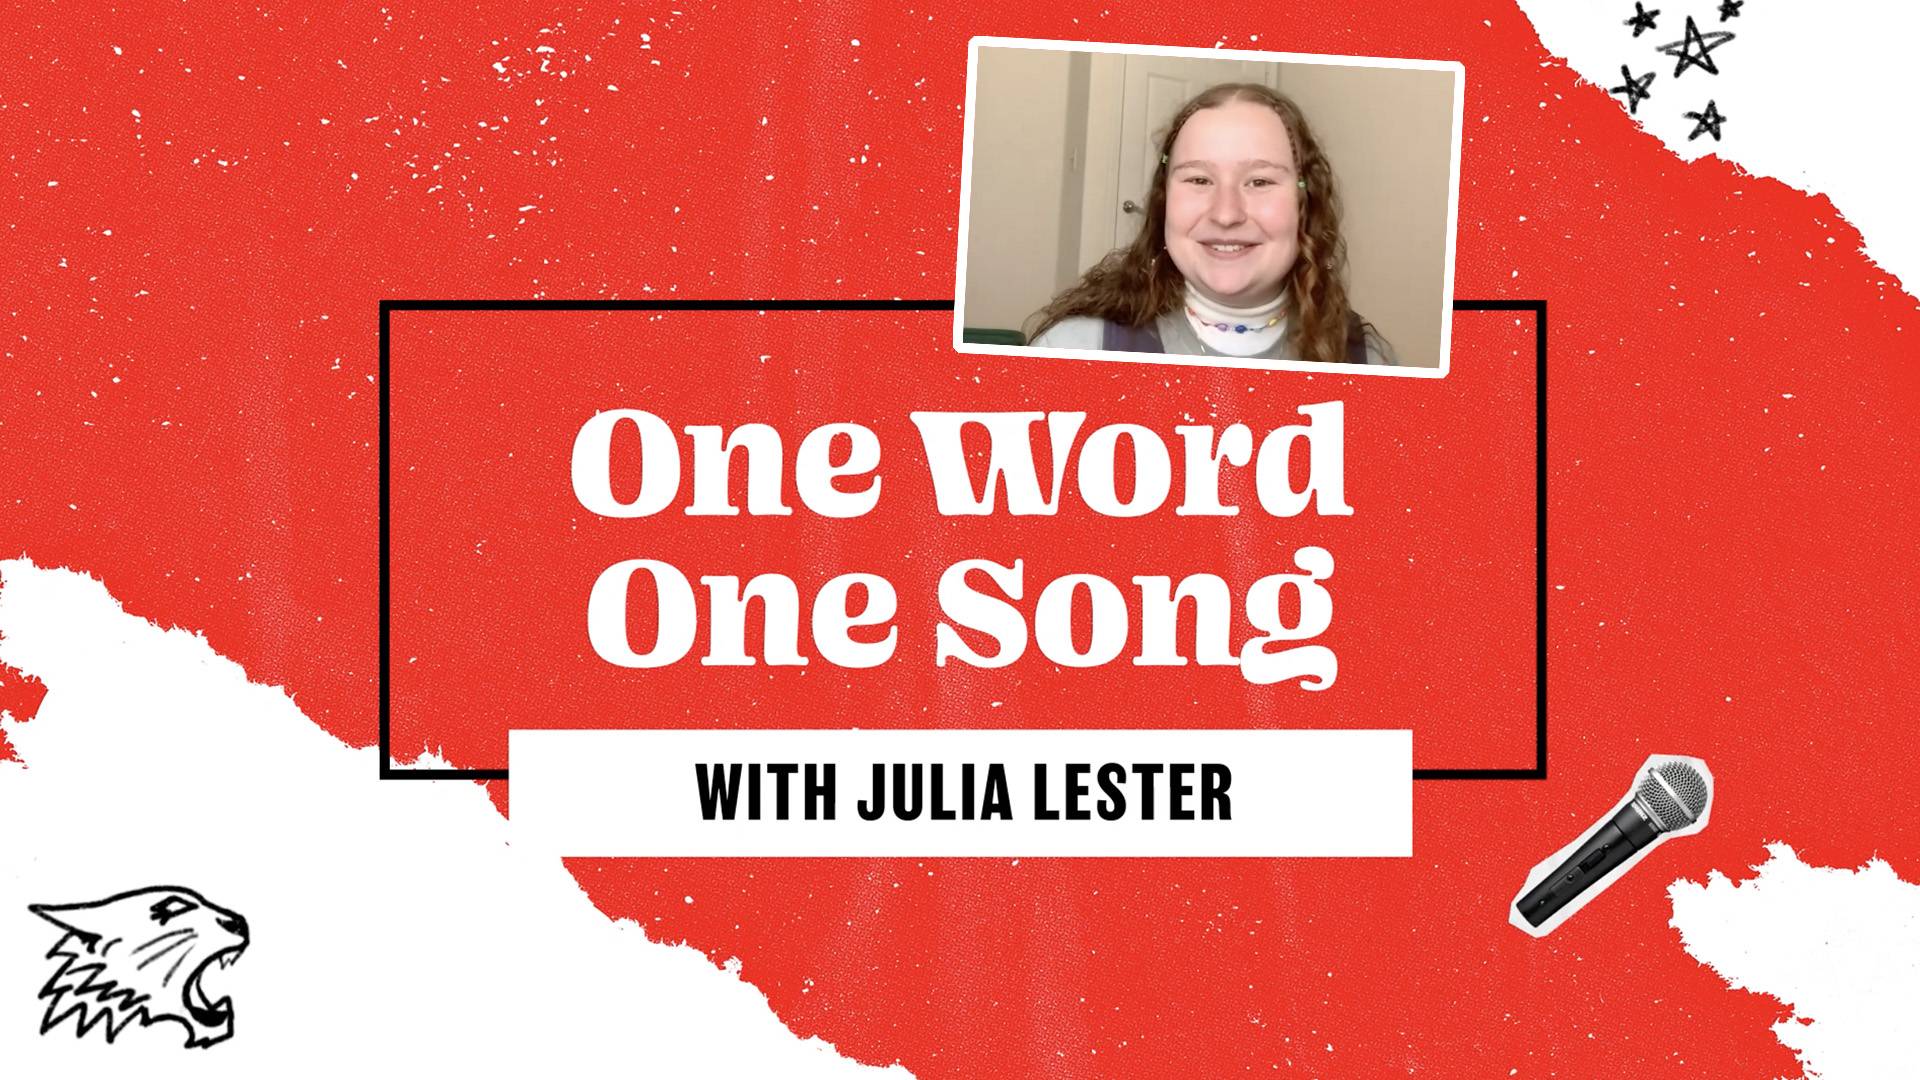 [HSMTMTS] ONE WORD ONE SONG WITH JULIA LESTER